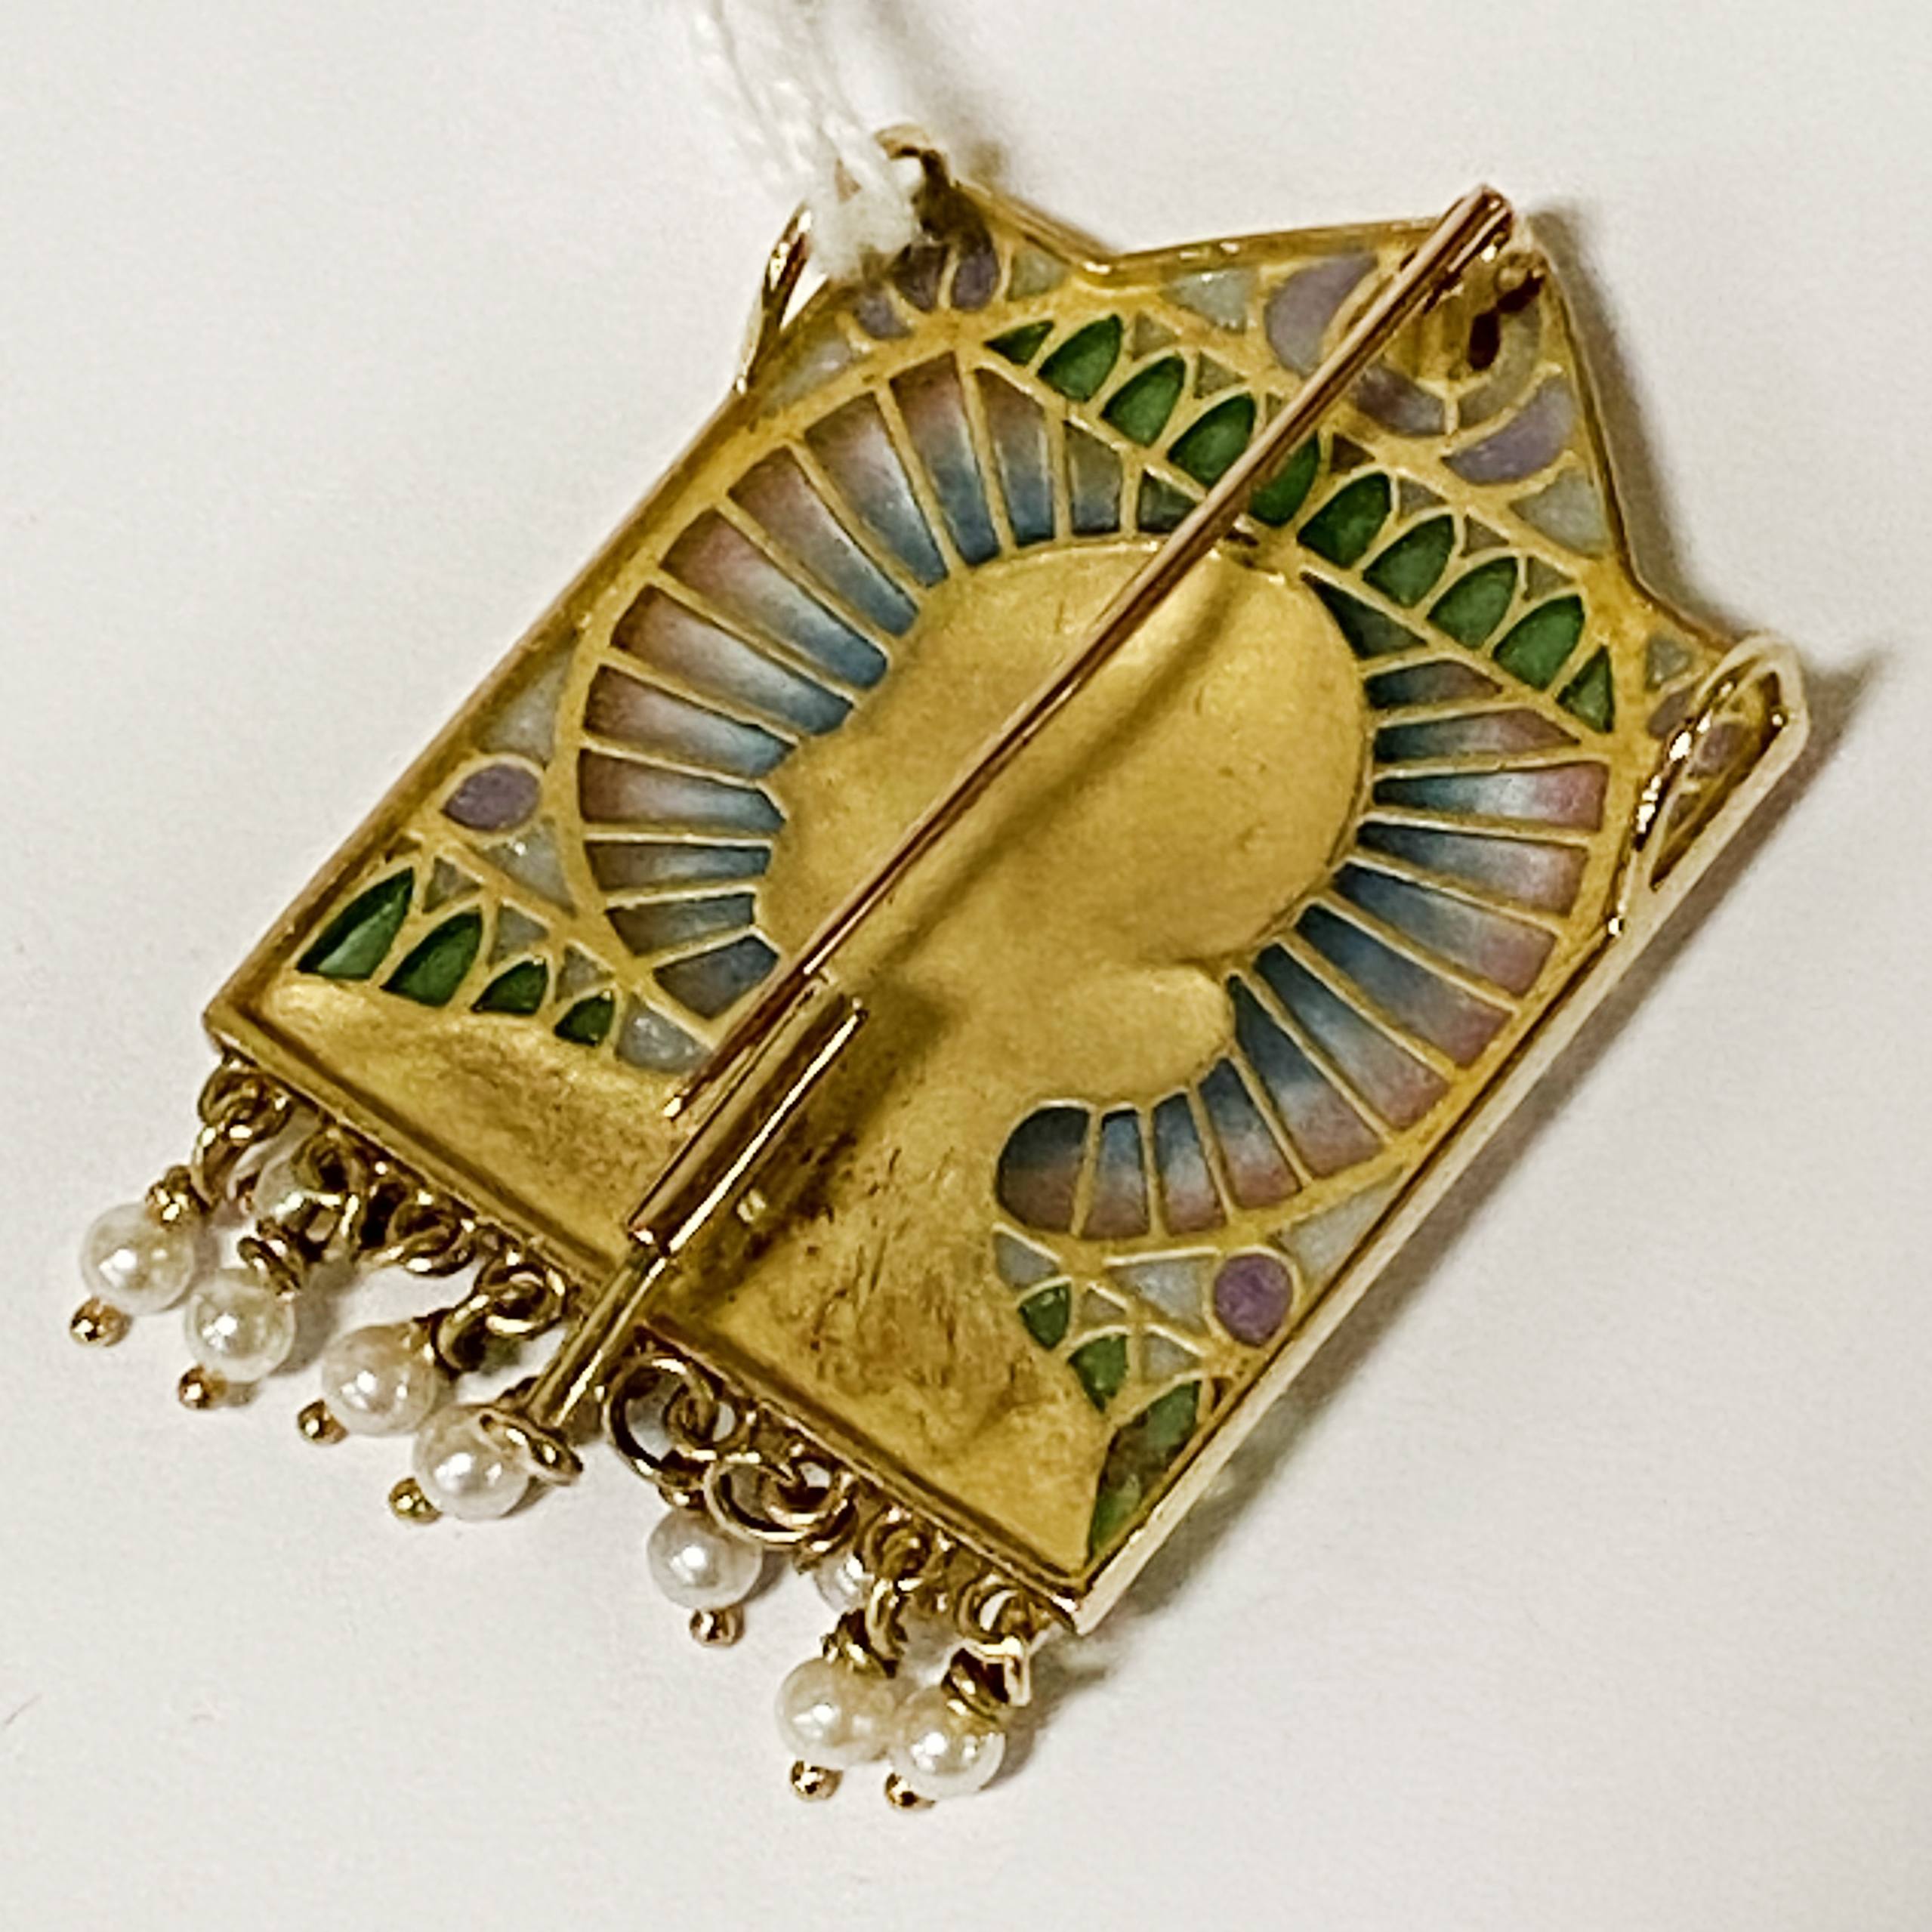 18CT SPANISH GOLD/DIAMOND/SEED PEARL & ENAMEL PENDANT POSSIBLY IN THE STYLE OF MASRIERA - 11.1 GRAMS - Image 2 of 2